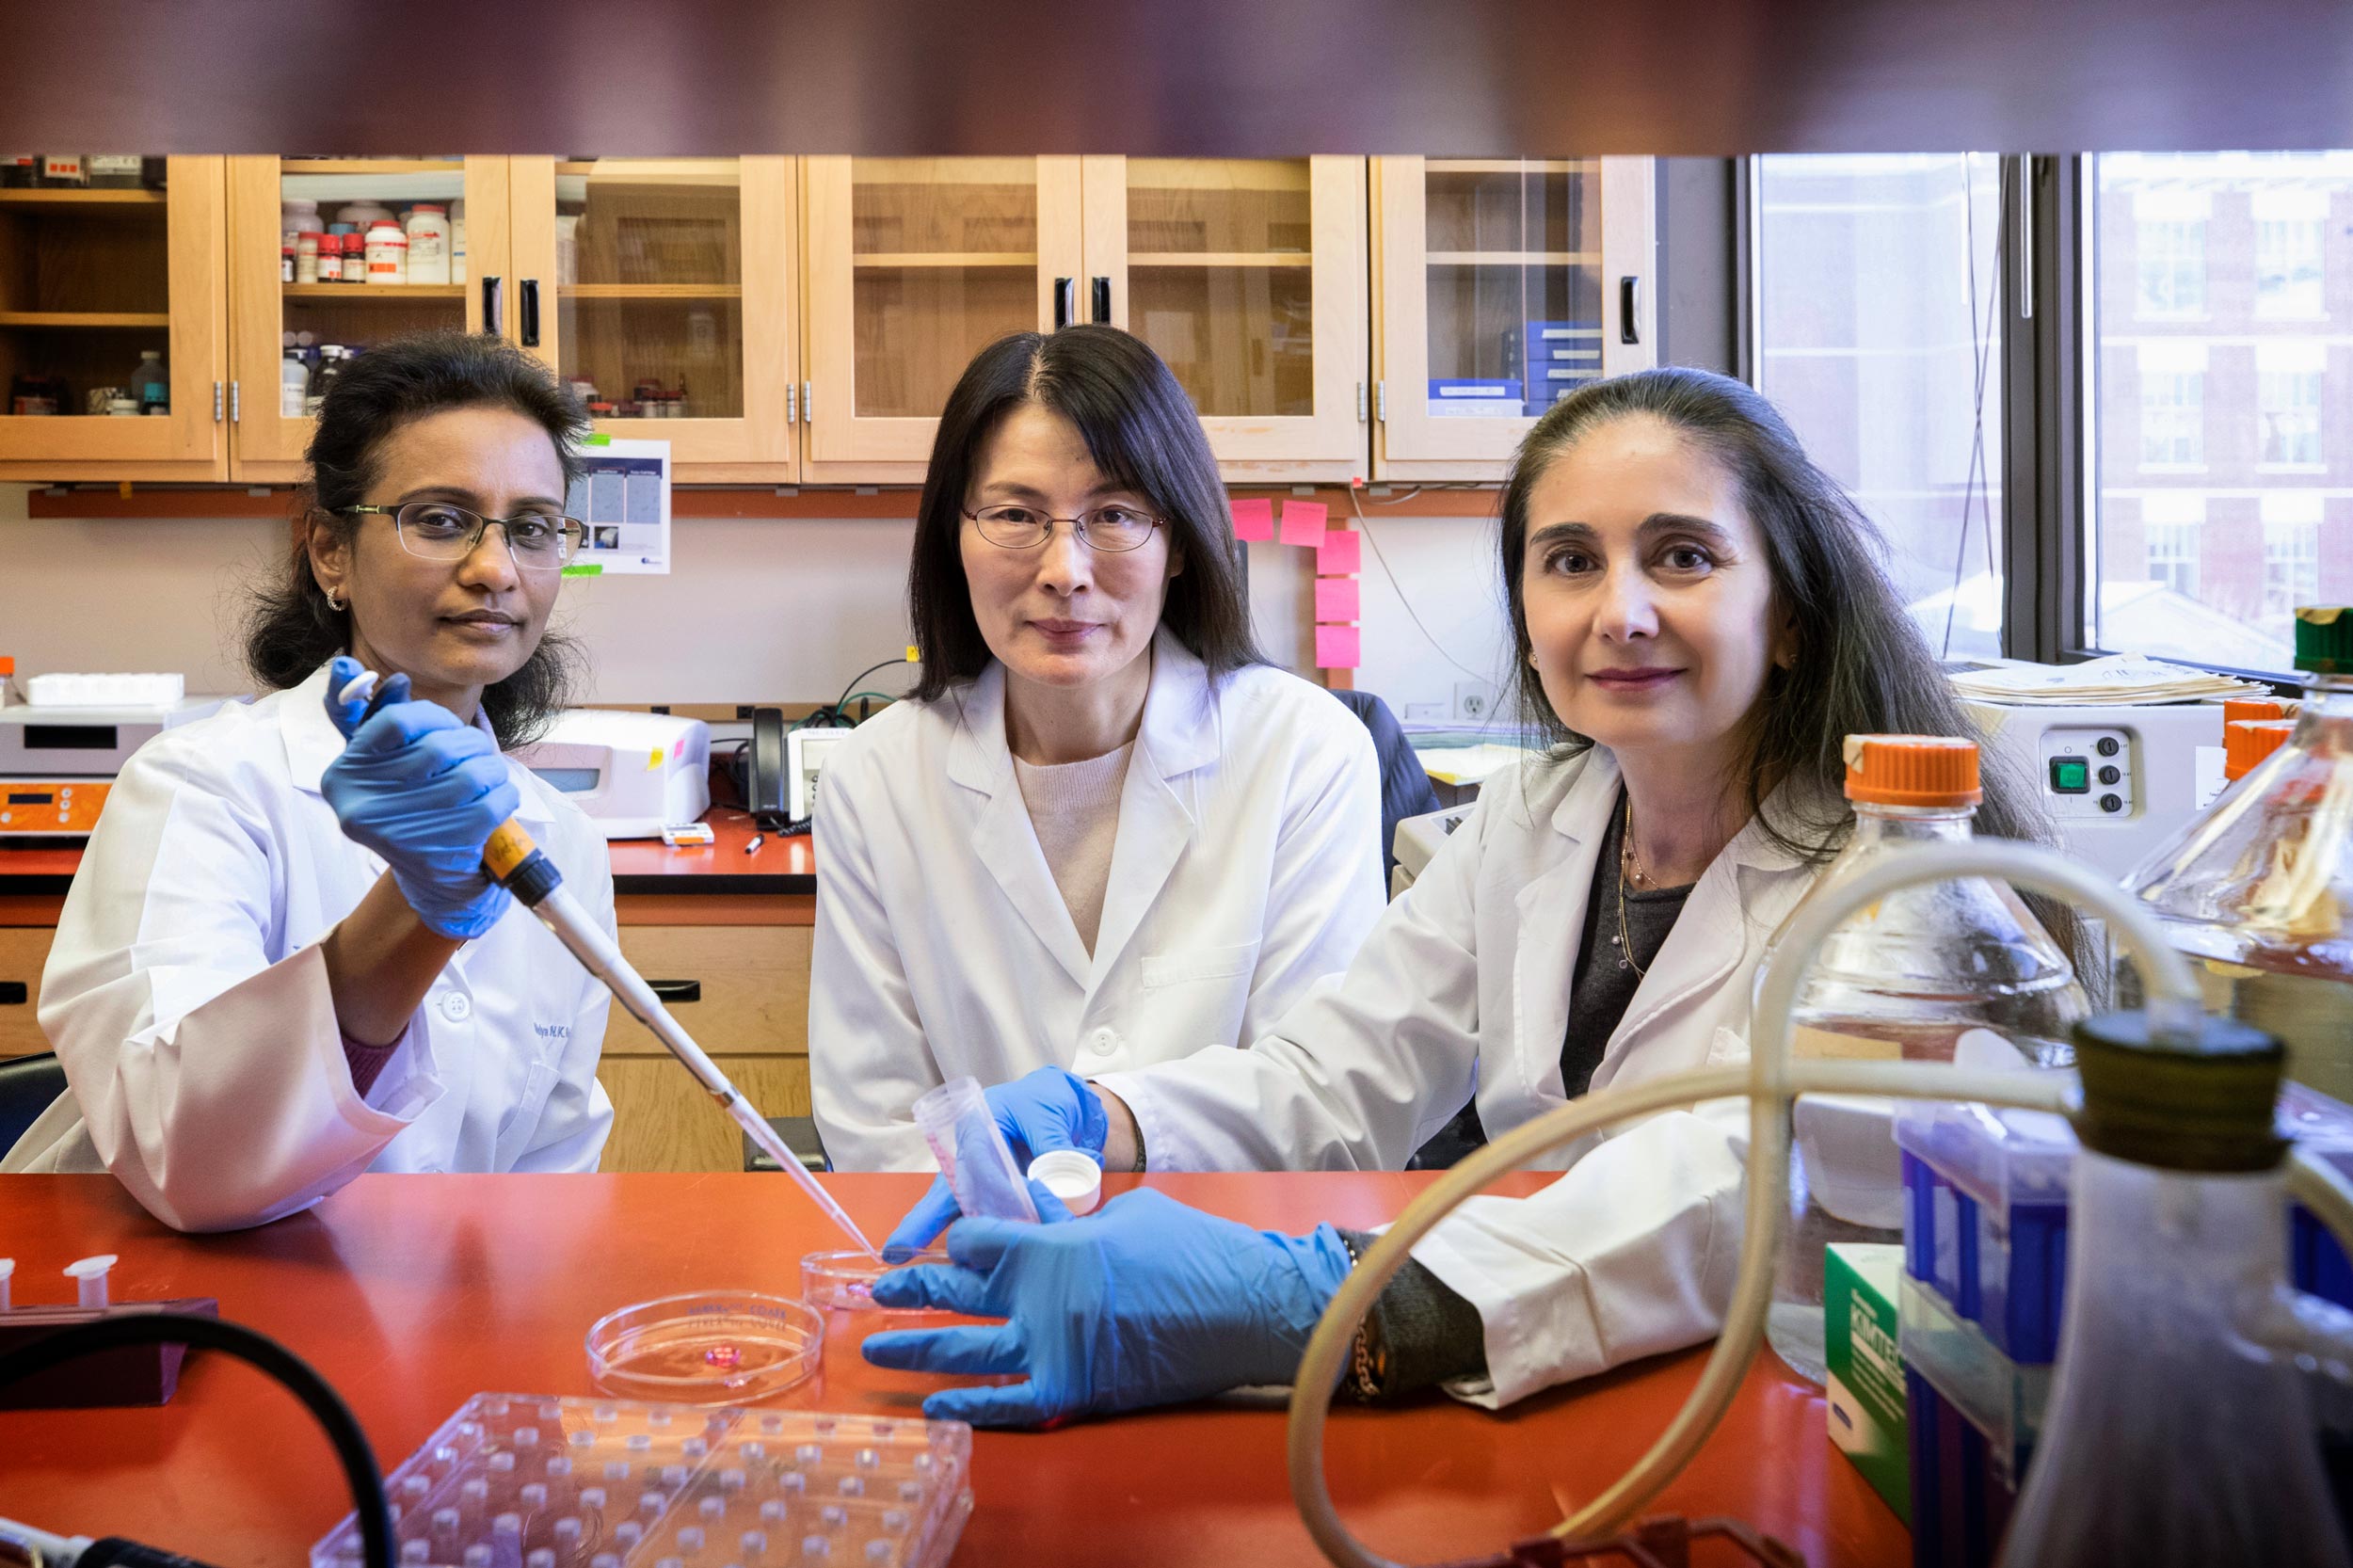 Left to right: Vidya K. Nagalakshmi, Minghong Li and Maria Luisa S. Sequeira-Lopez work together on an experiment